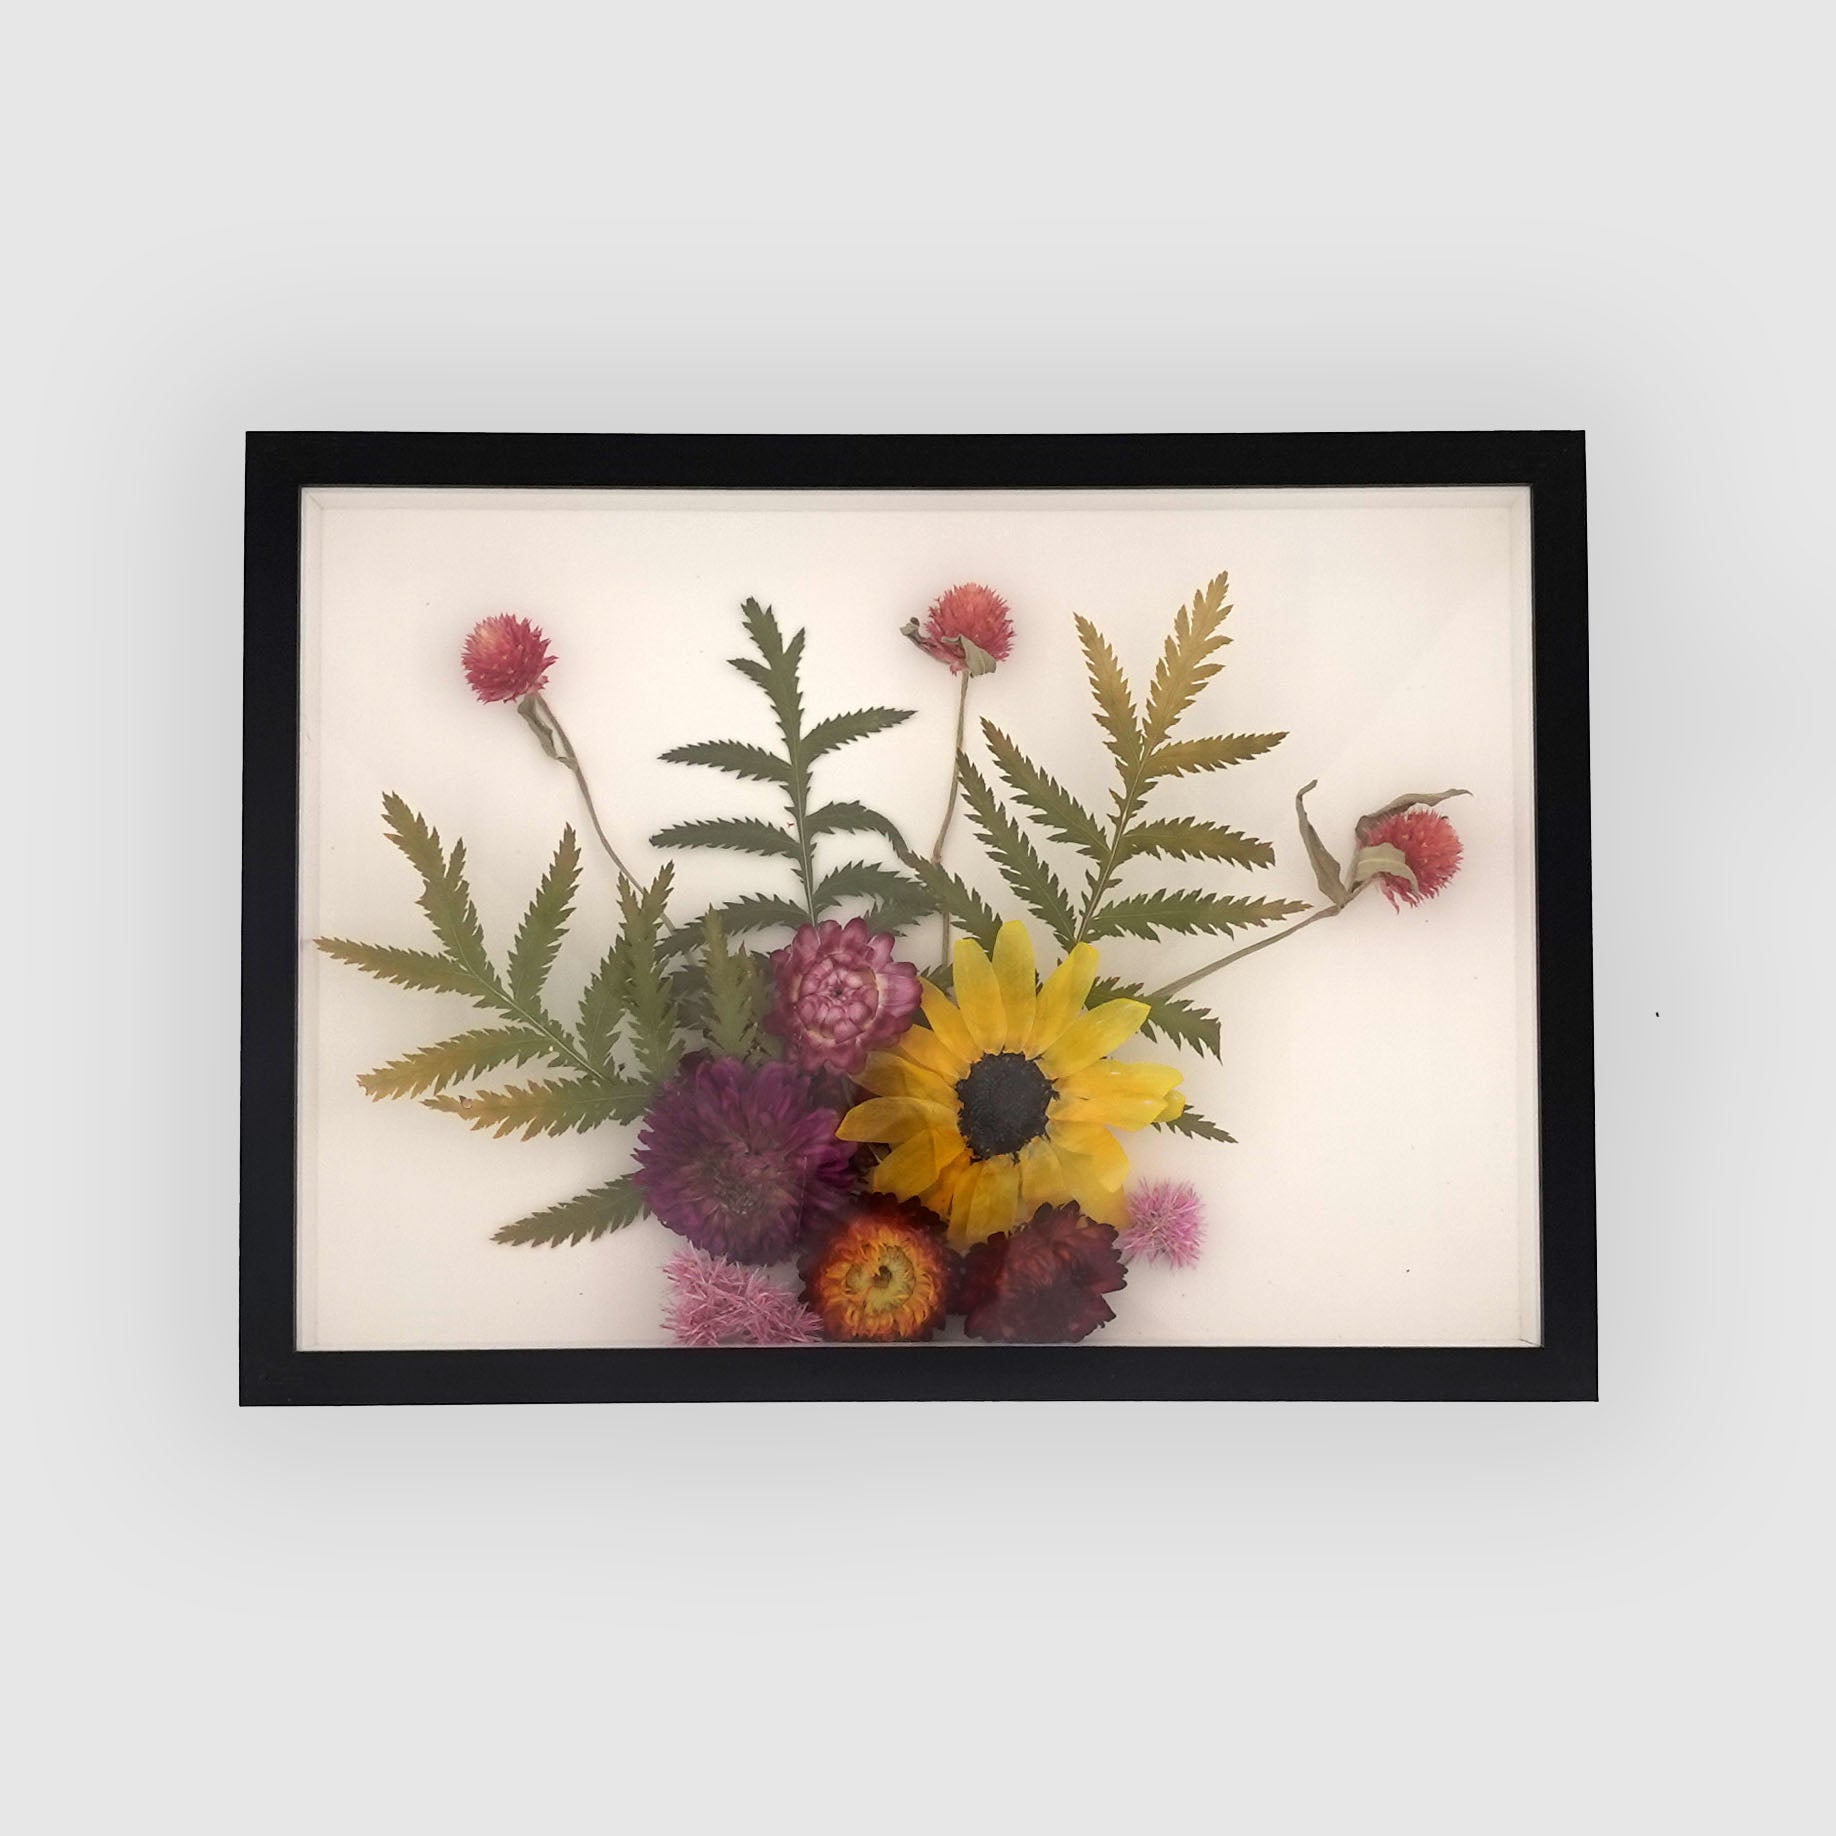 3D Dried Flower Frame (Style 5)